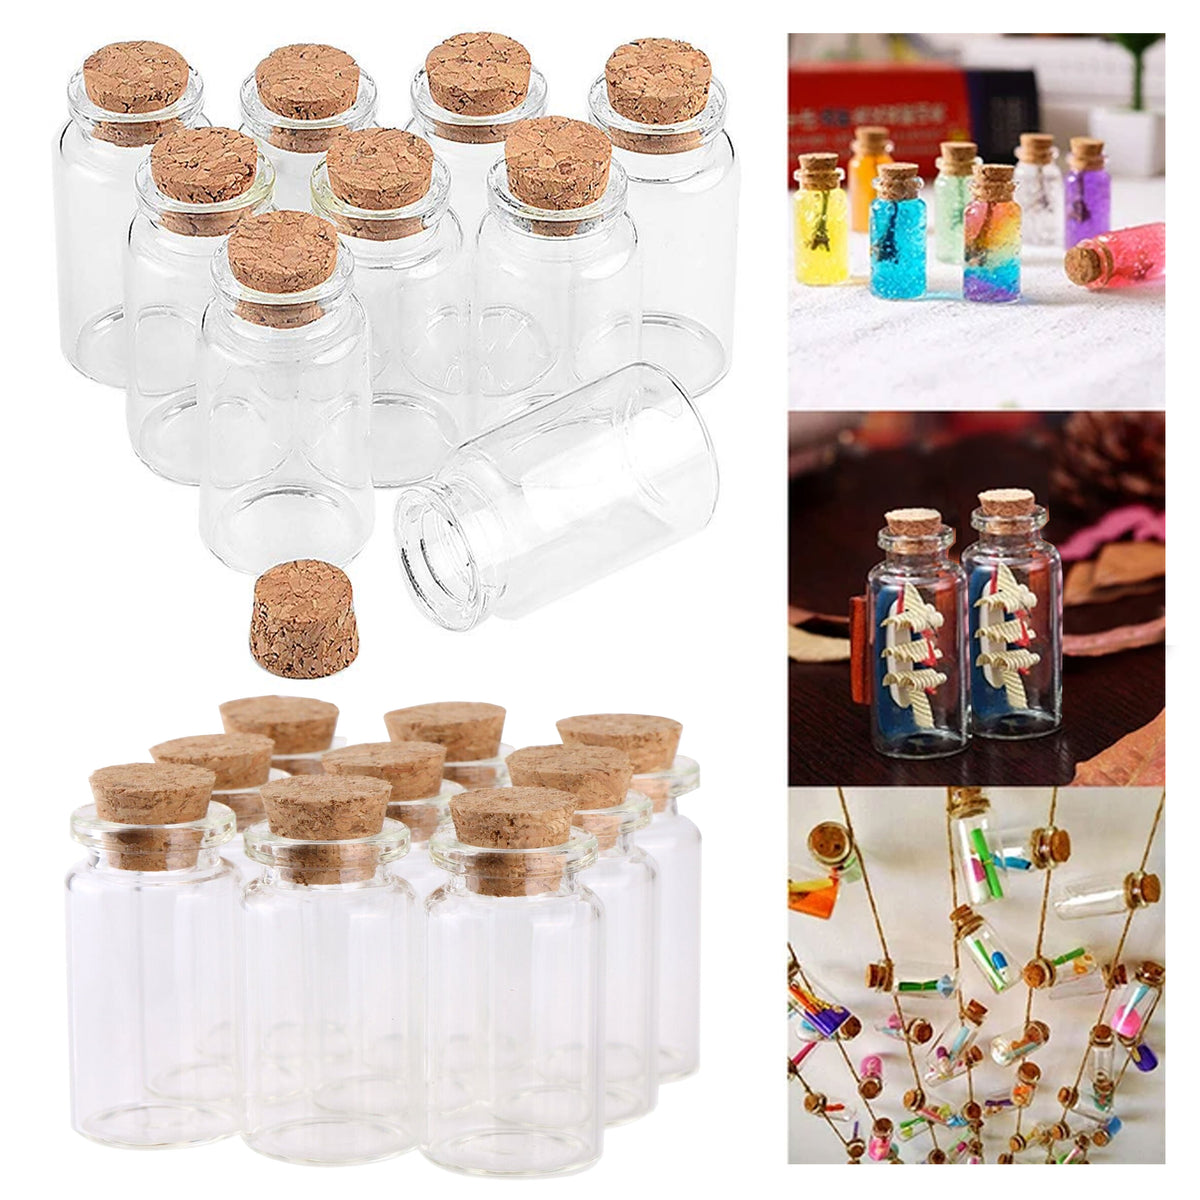 Yesker IPV023 Package of 24 Small Mini Glass Jars with Cork